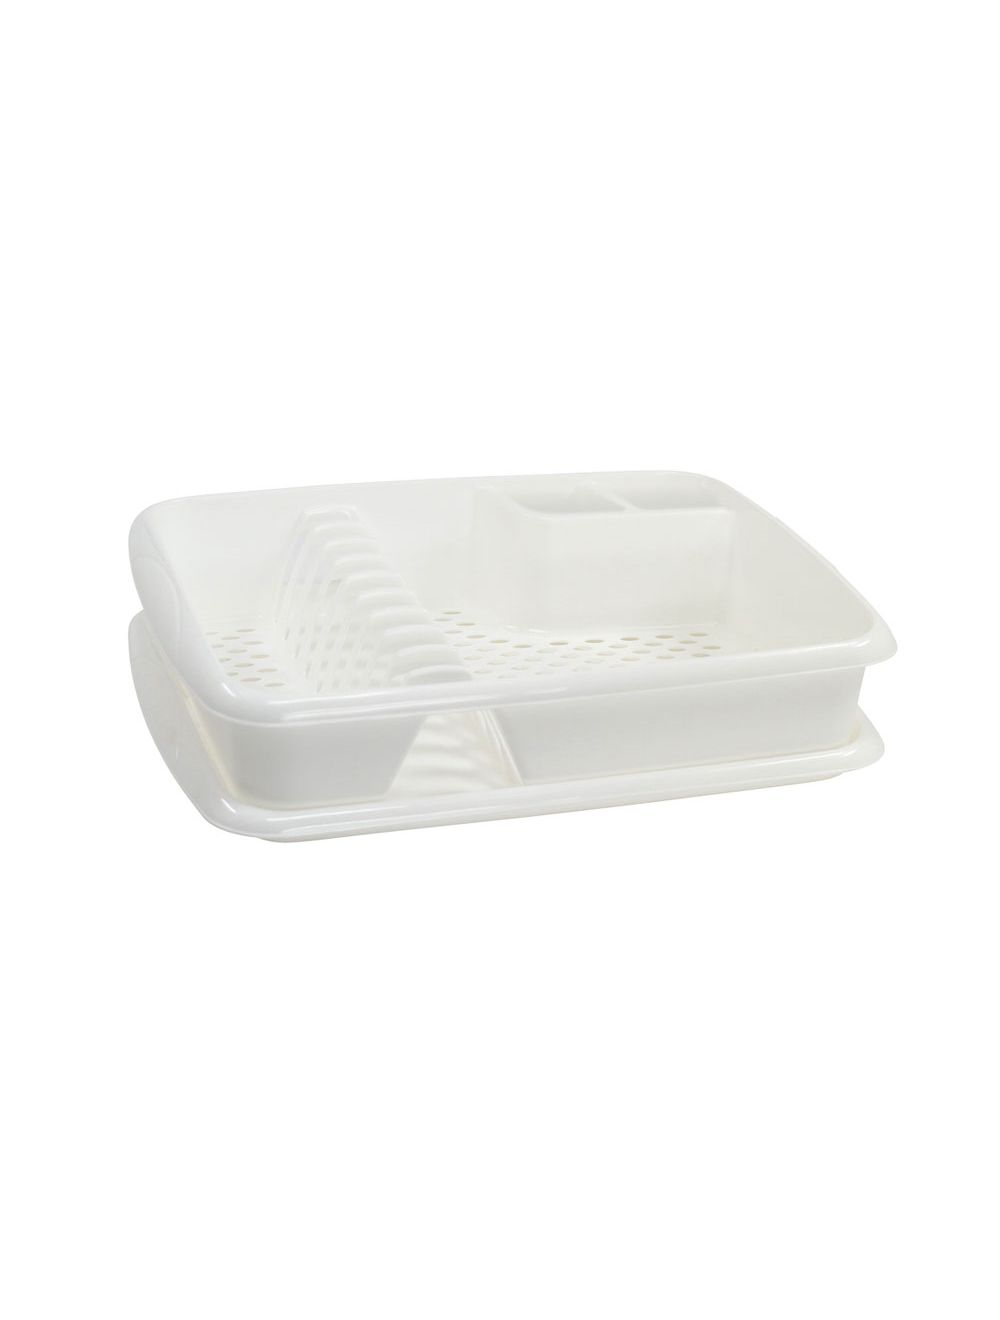 Cutlery Box With Drainer